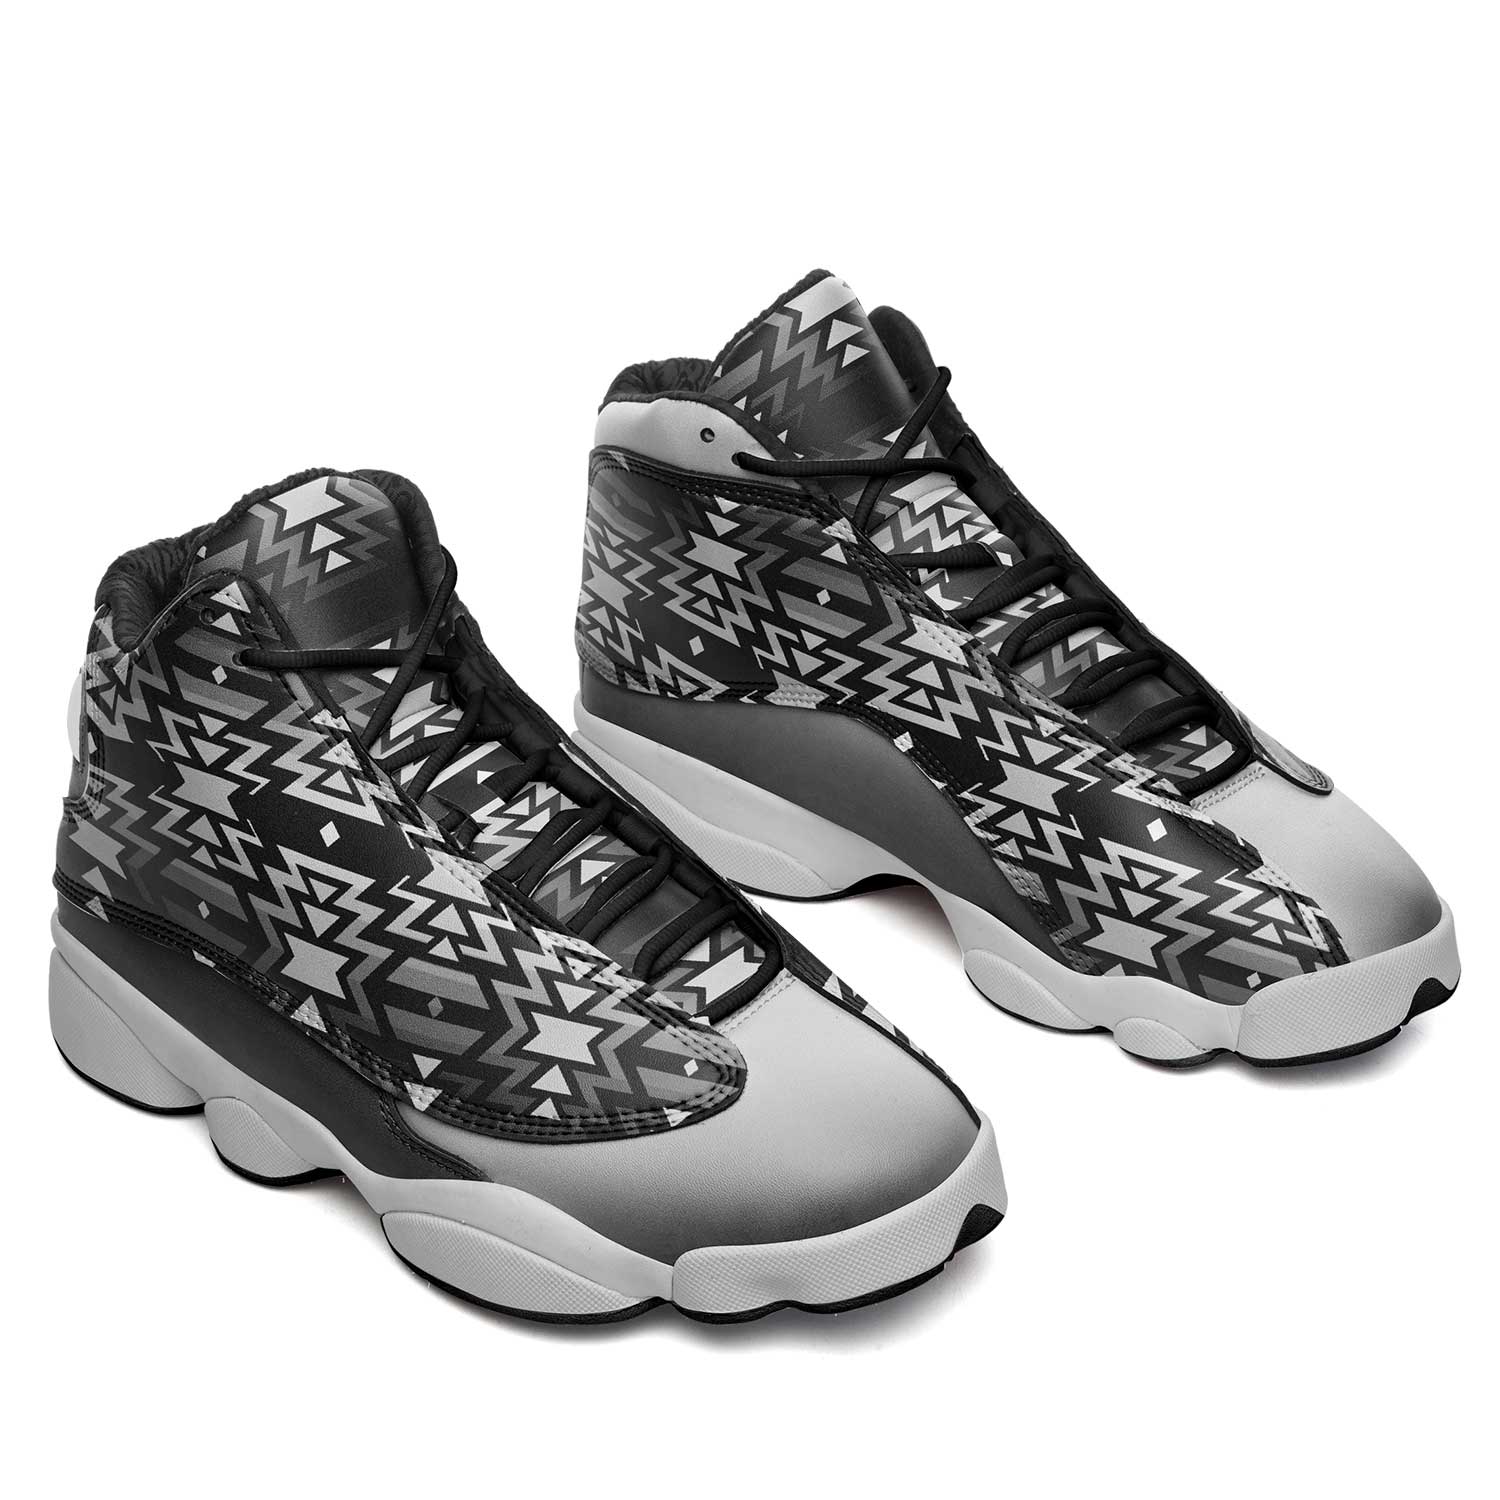 Black Fire Black and White Athletic Shoes Herman 